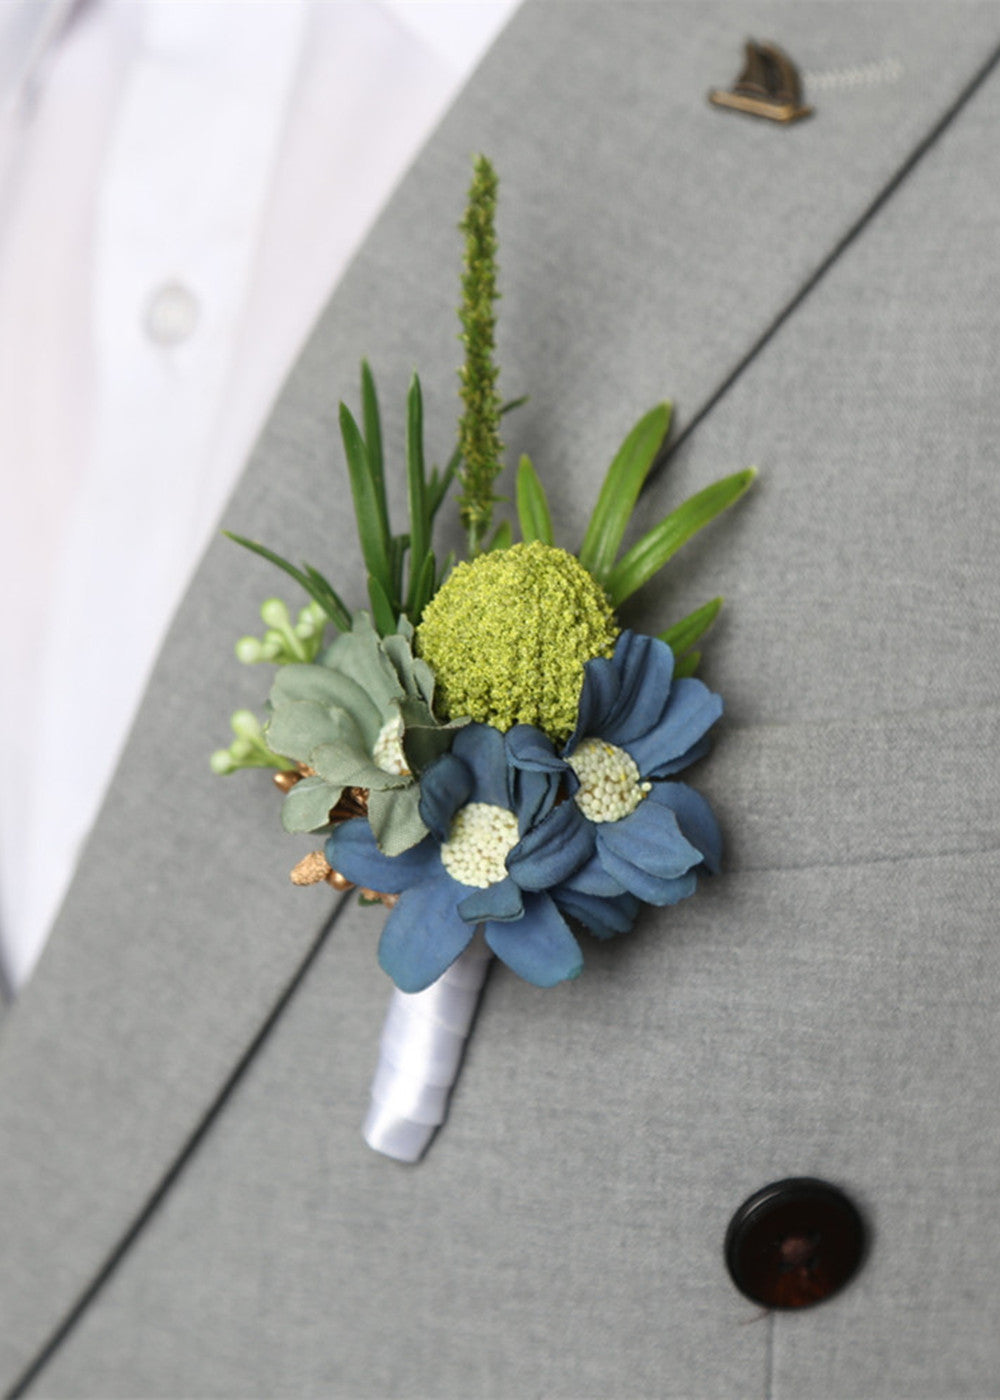 Wedding boutonniere for Groom and Best Man